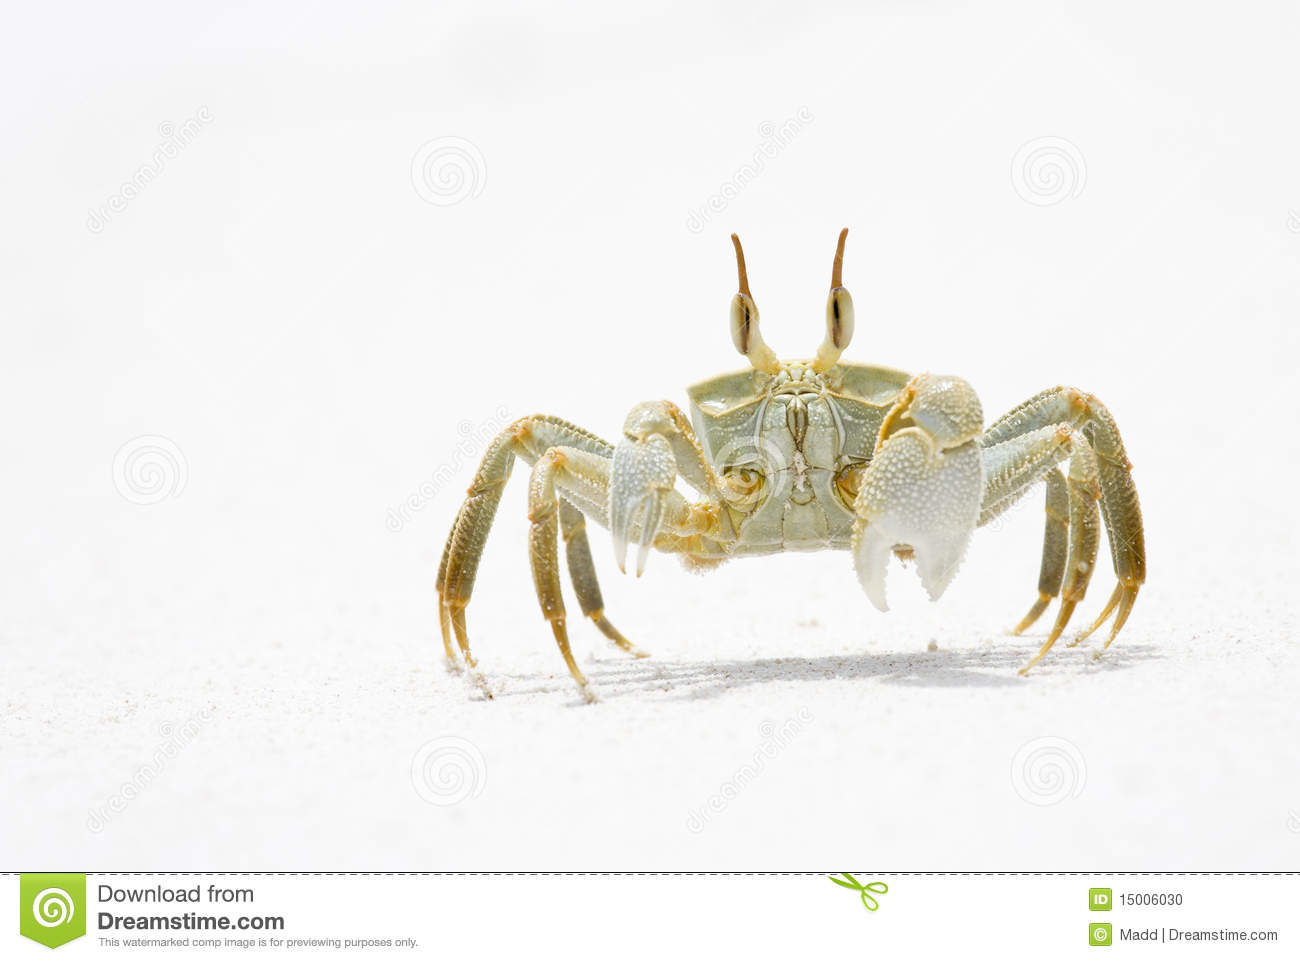 Ghost Crab clipart #3, Download drawings